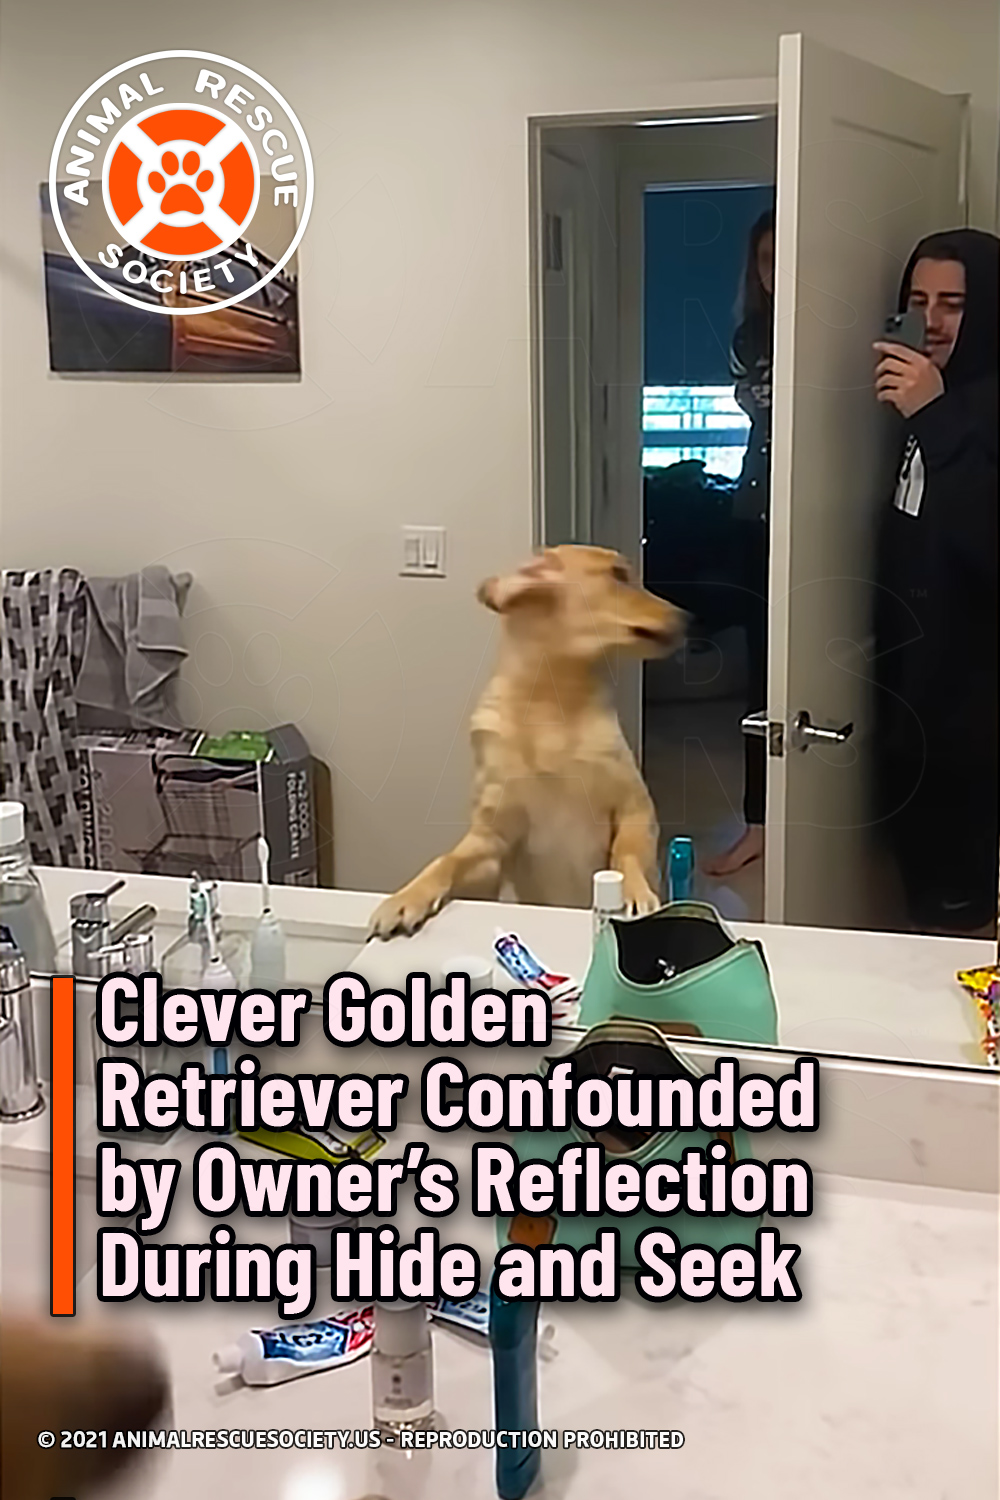 Clever Golden Retriever Confounded by Owner’s Reflection During Hide and Seek